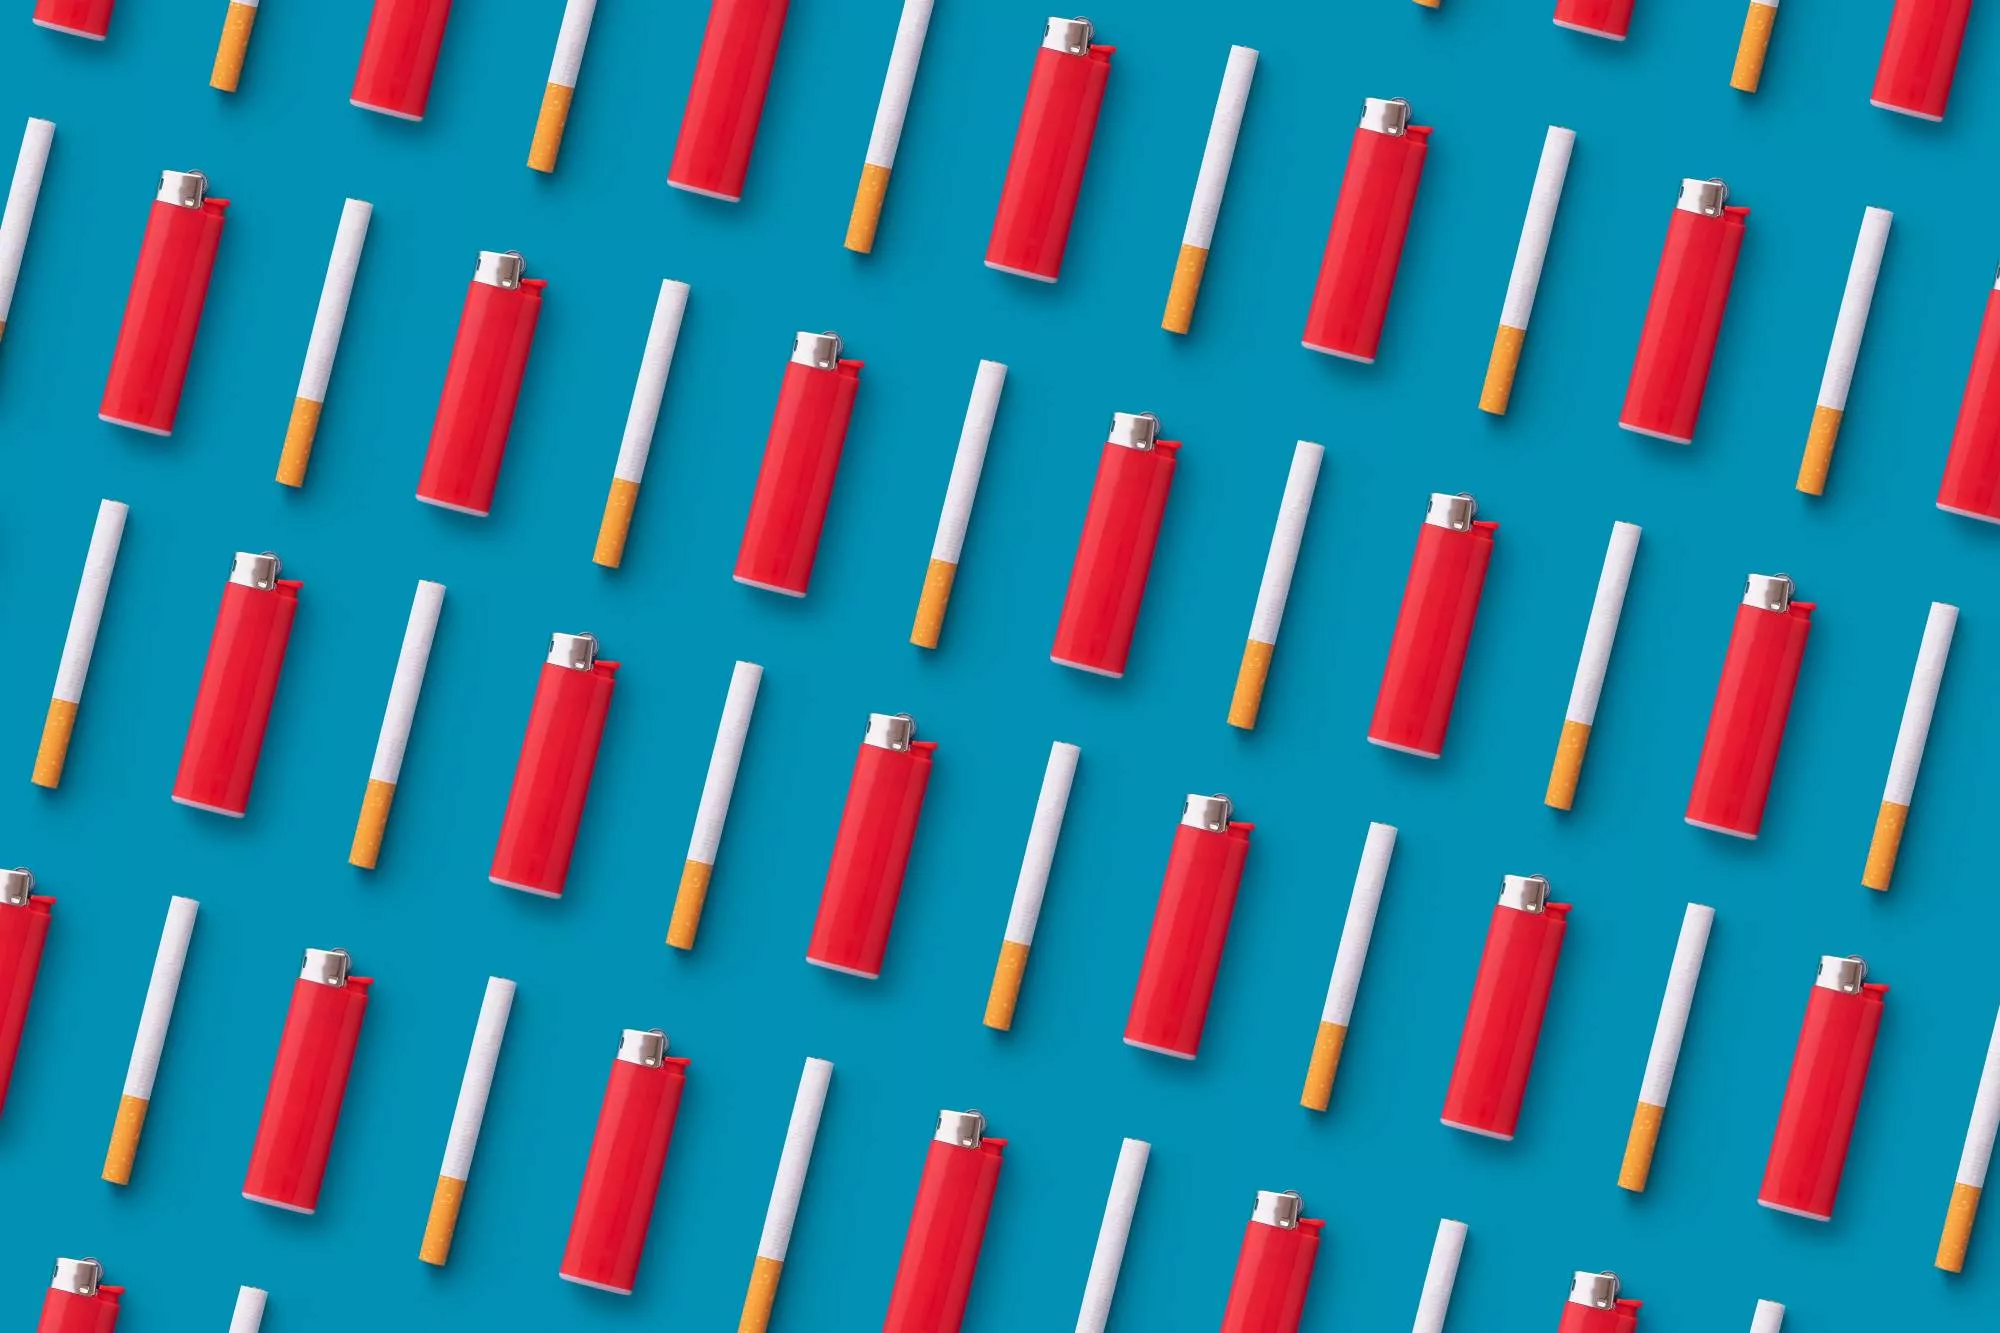 cigarettes and red lighters on blue background that you can sell if you have a tobacco license